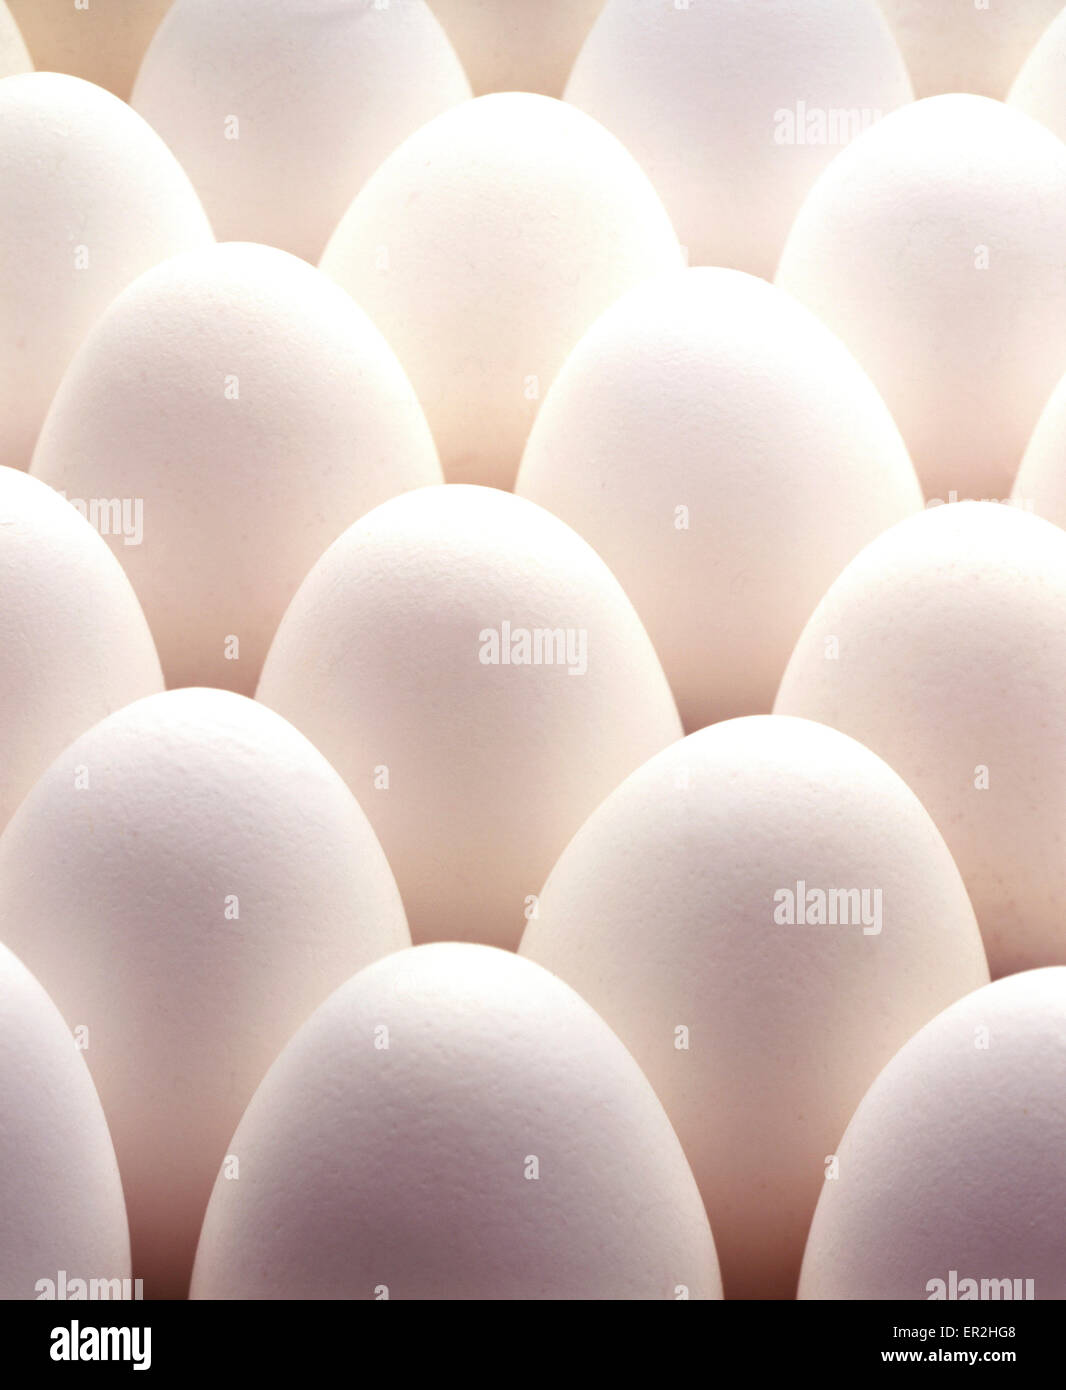 hen eggs, white, still life, food, eggs, same, identical, side by side, many, background, egg shells, cholesterol, protein, shap Stock Photo